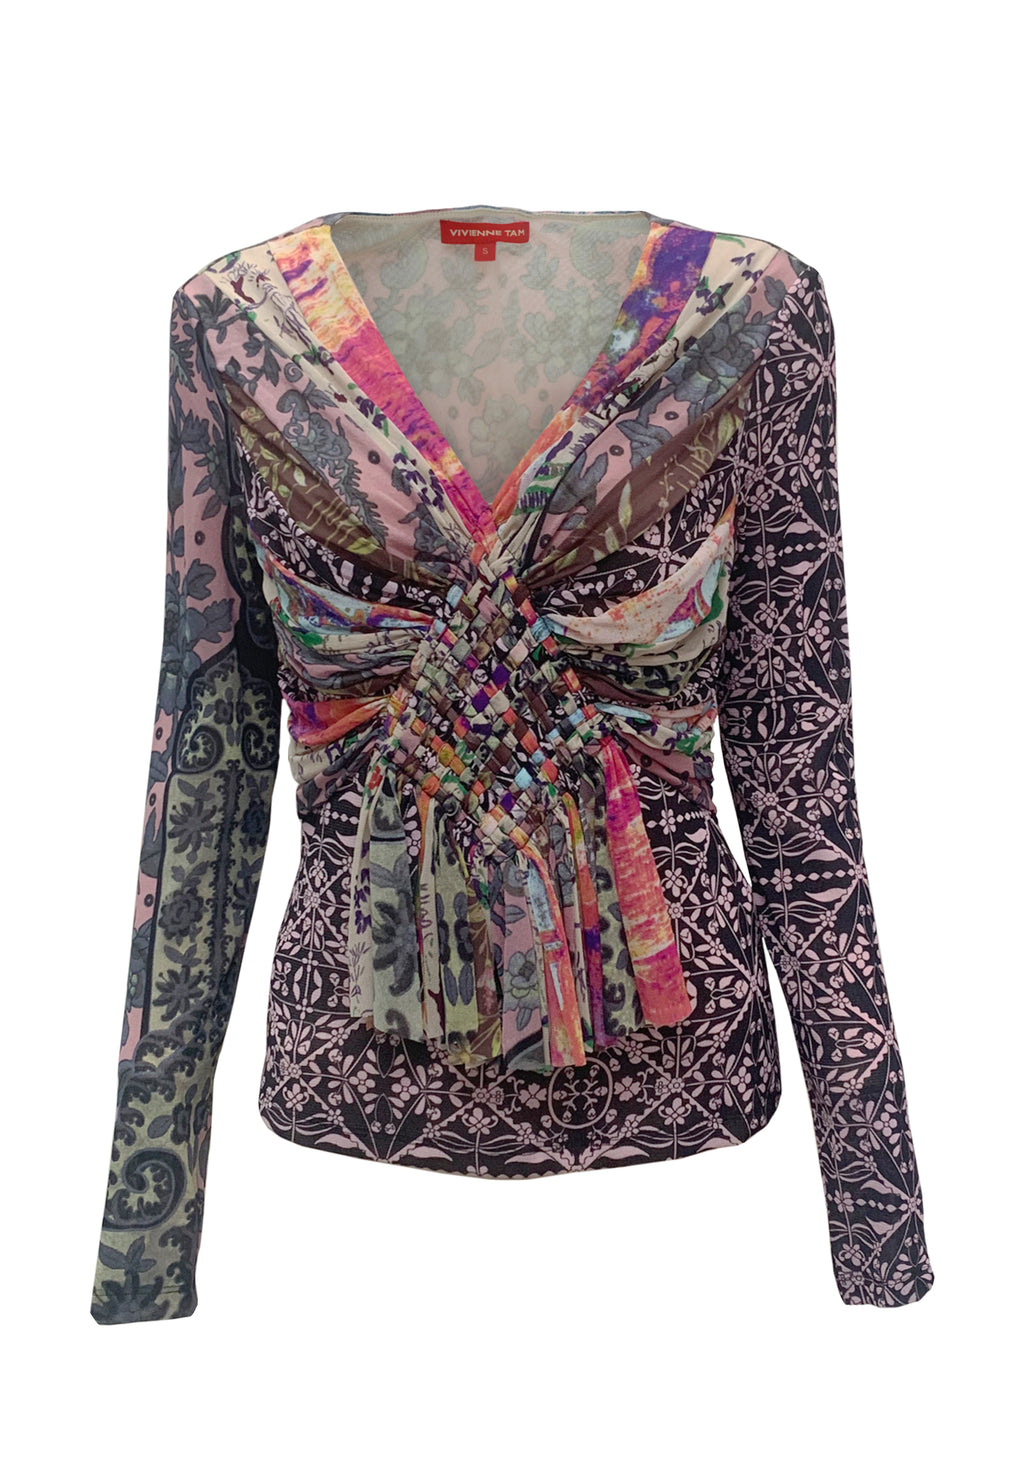 PATCHWORK PRINT ON ST NETTING LONG SLEEVES V-NECK TOP